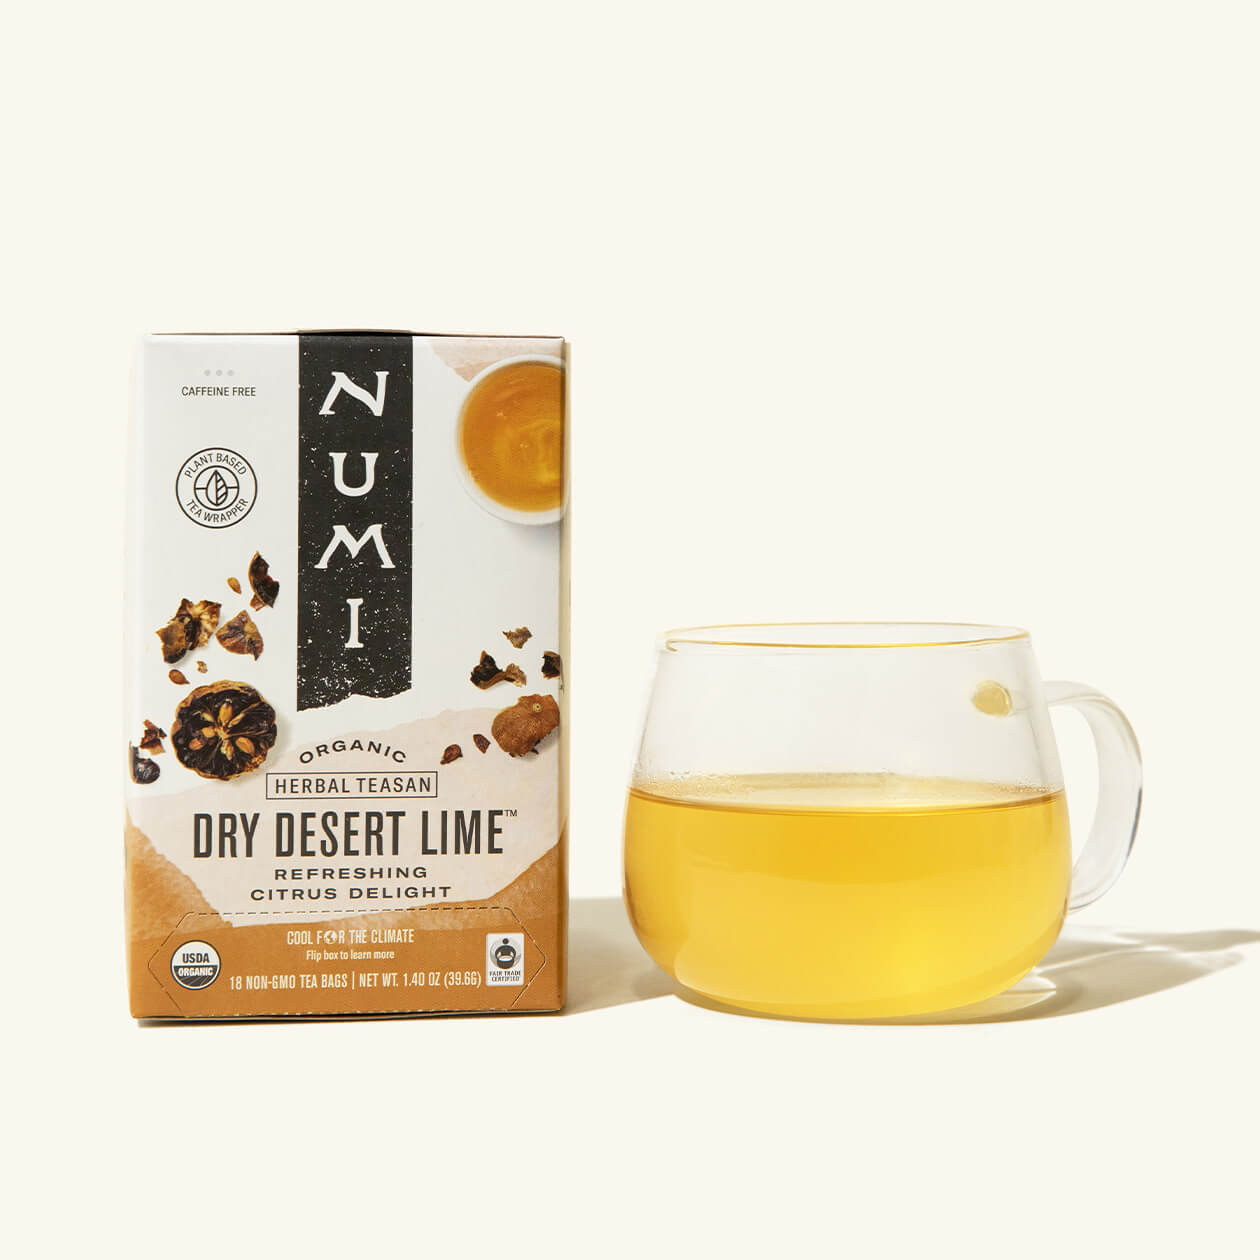 A box of Numi's Dry Desert Lime next to a brewed cup of tea in a clear cup